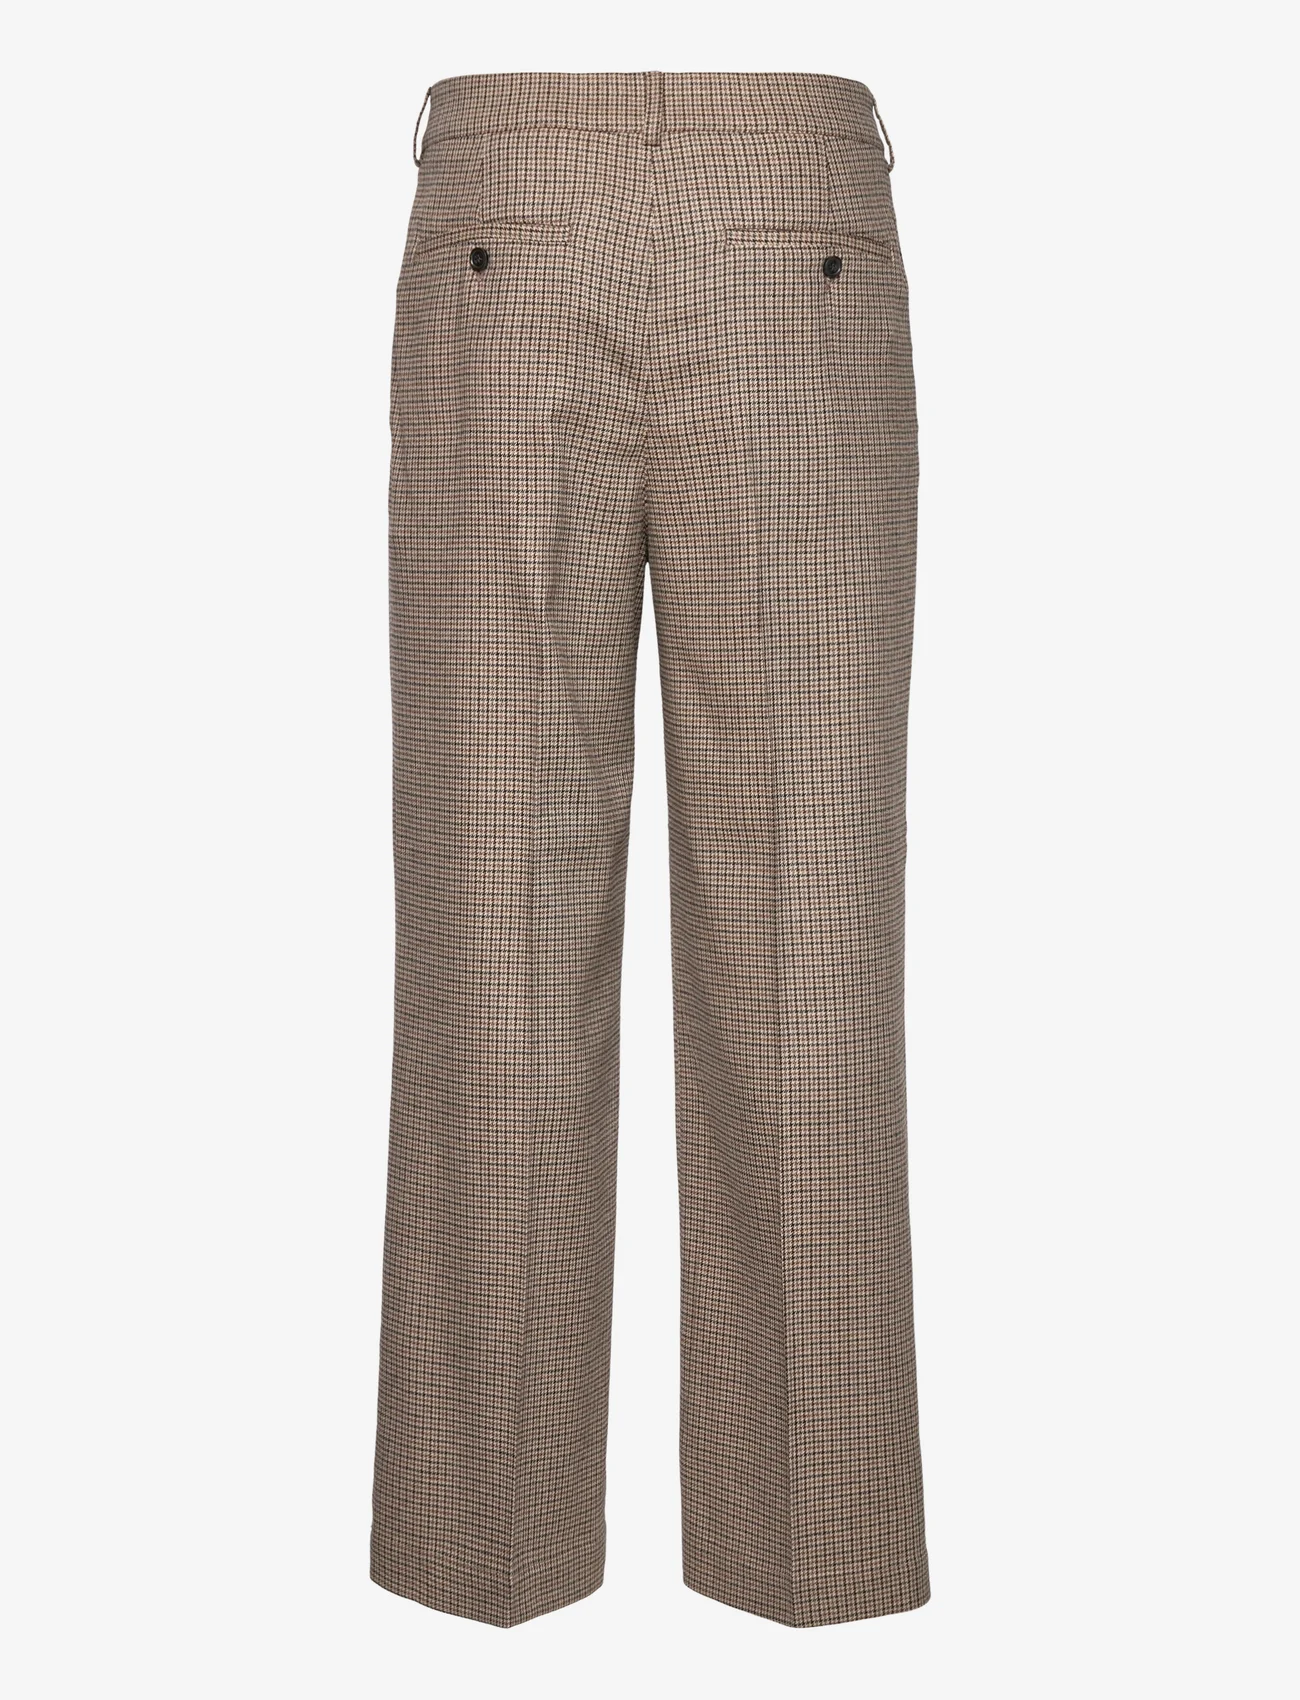 GANT - D2. PLEATED CHECKED SUIT PANT - kostymbyxor - dry sand - 1